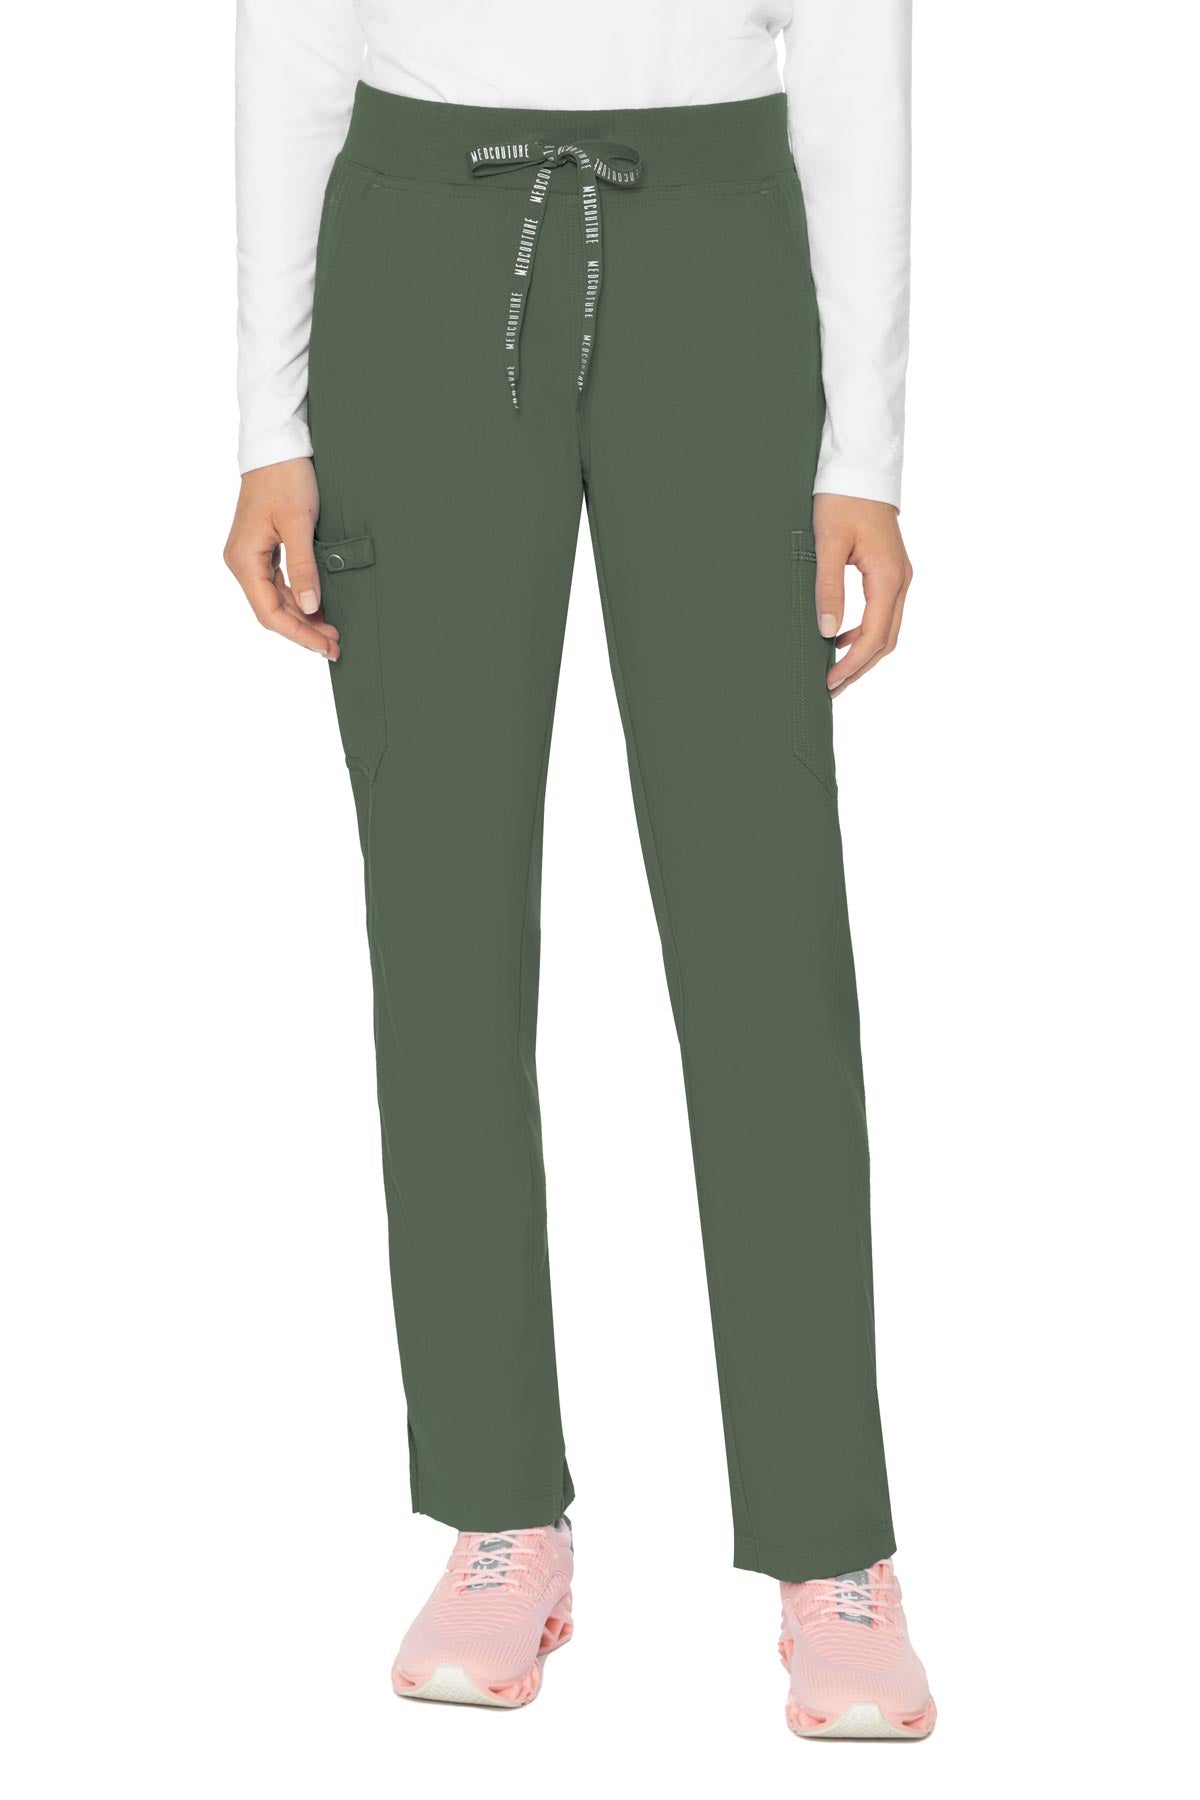 Med Couture Touch 7725 Women's Yoga 2 Cargo Pant